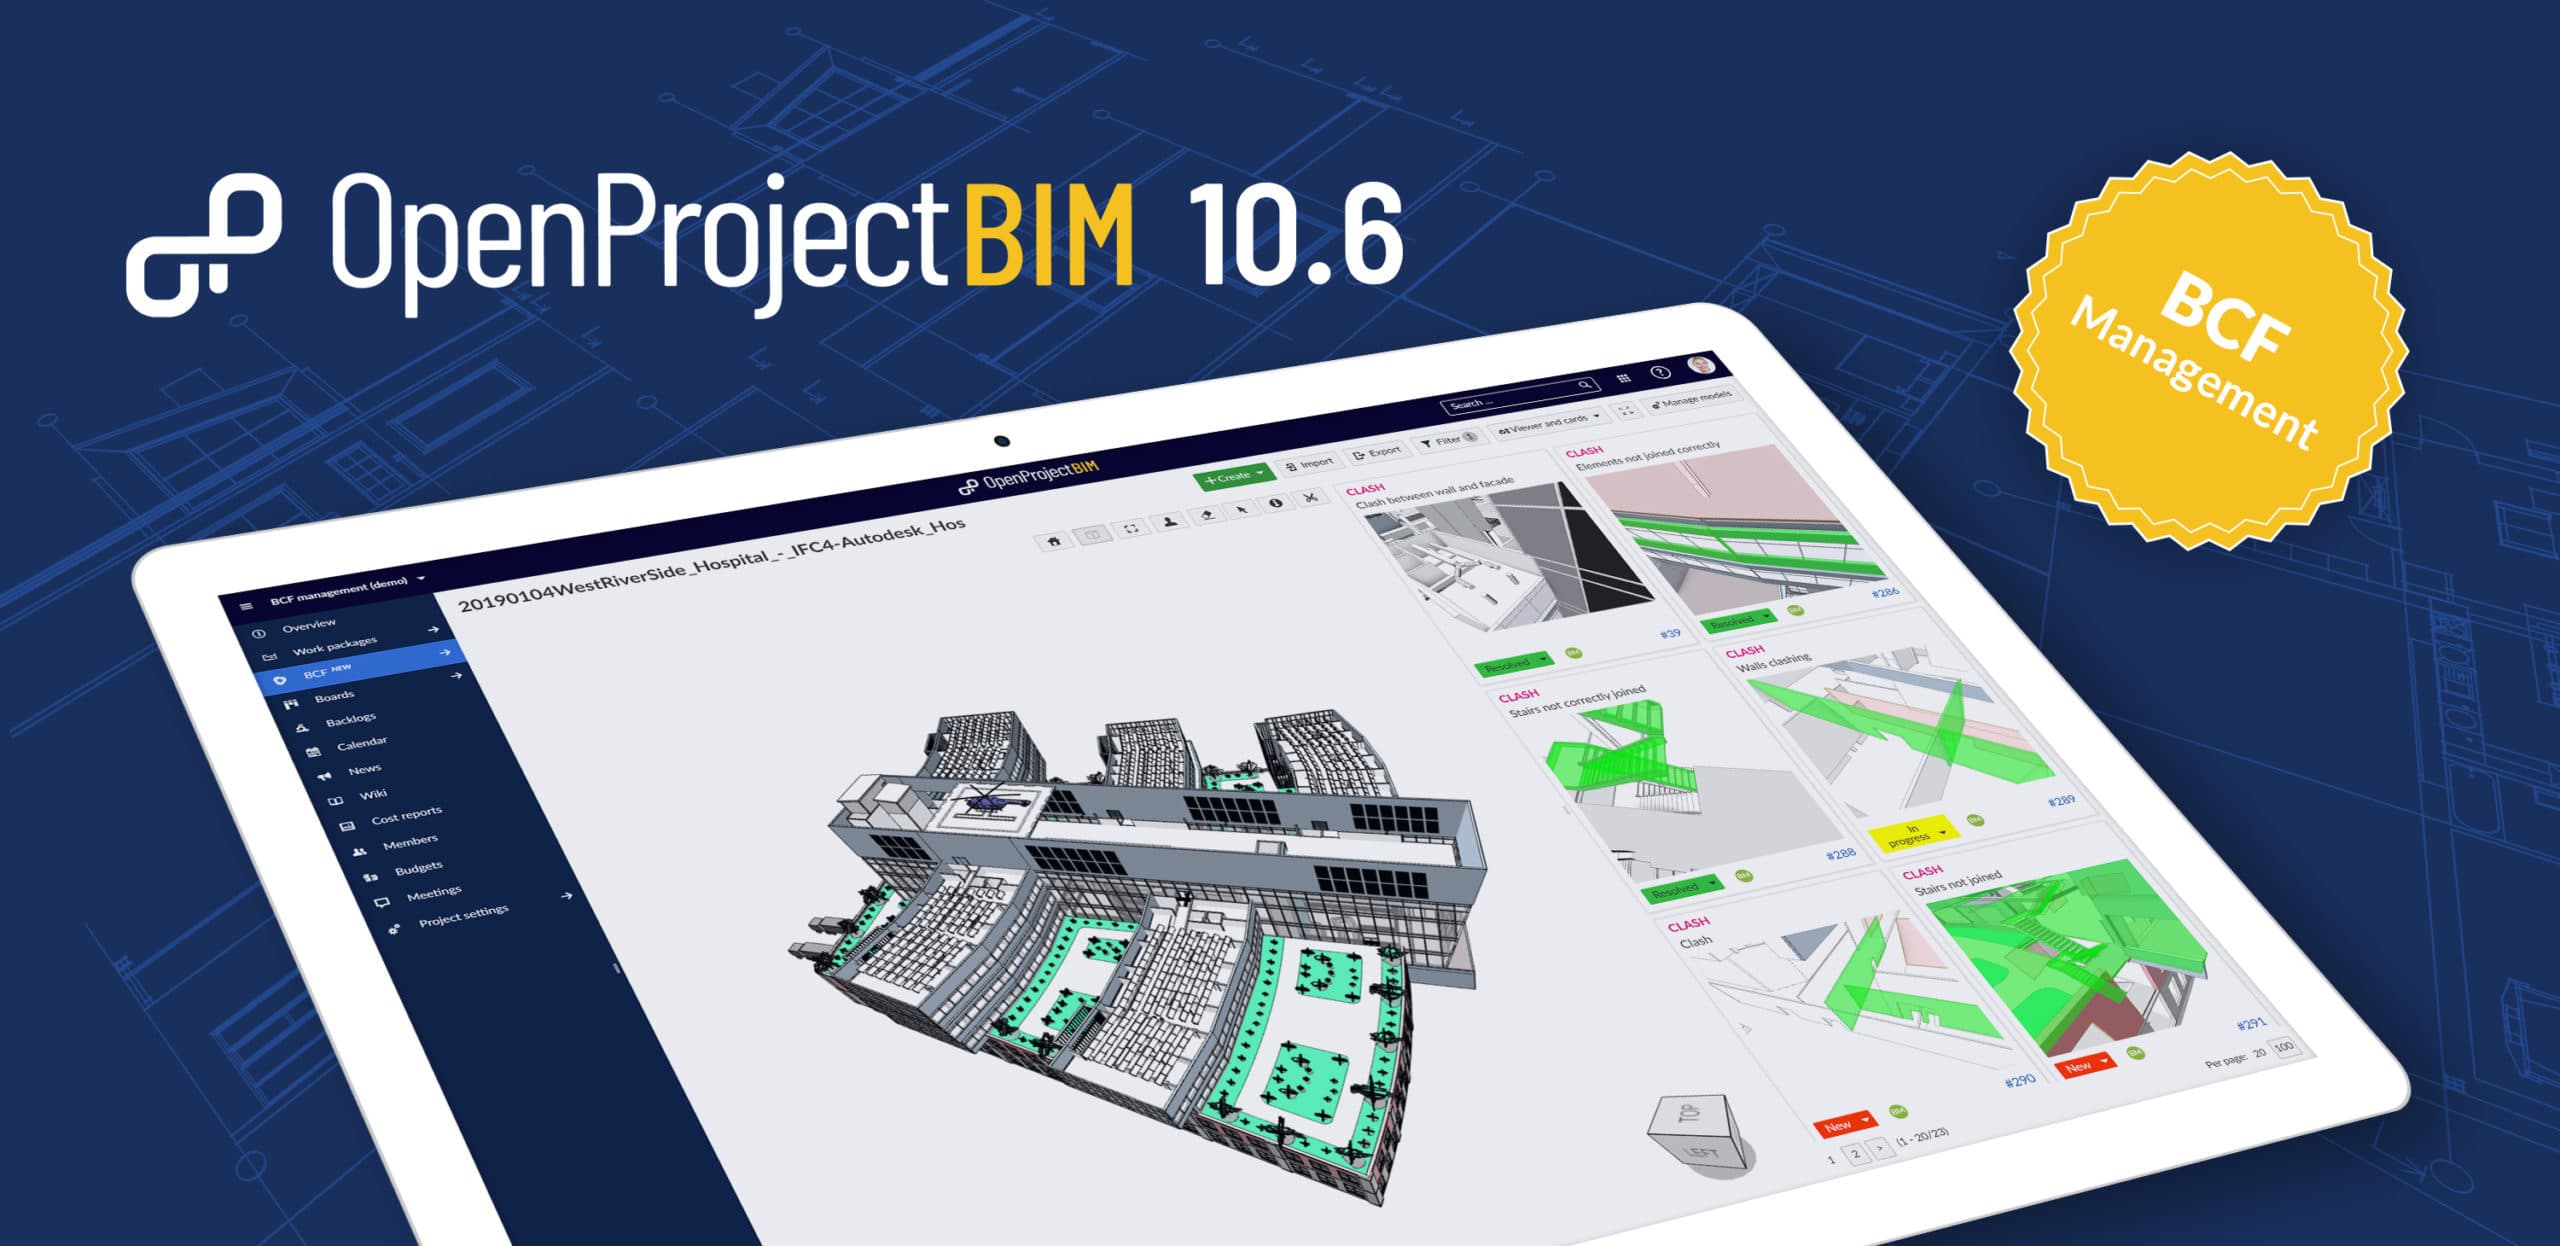 OpenProject BIM 10.6 released with improved BCF Management